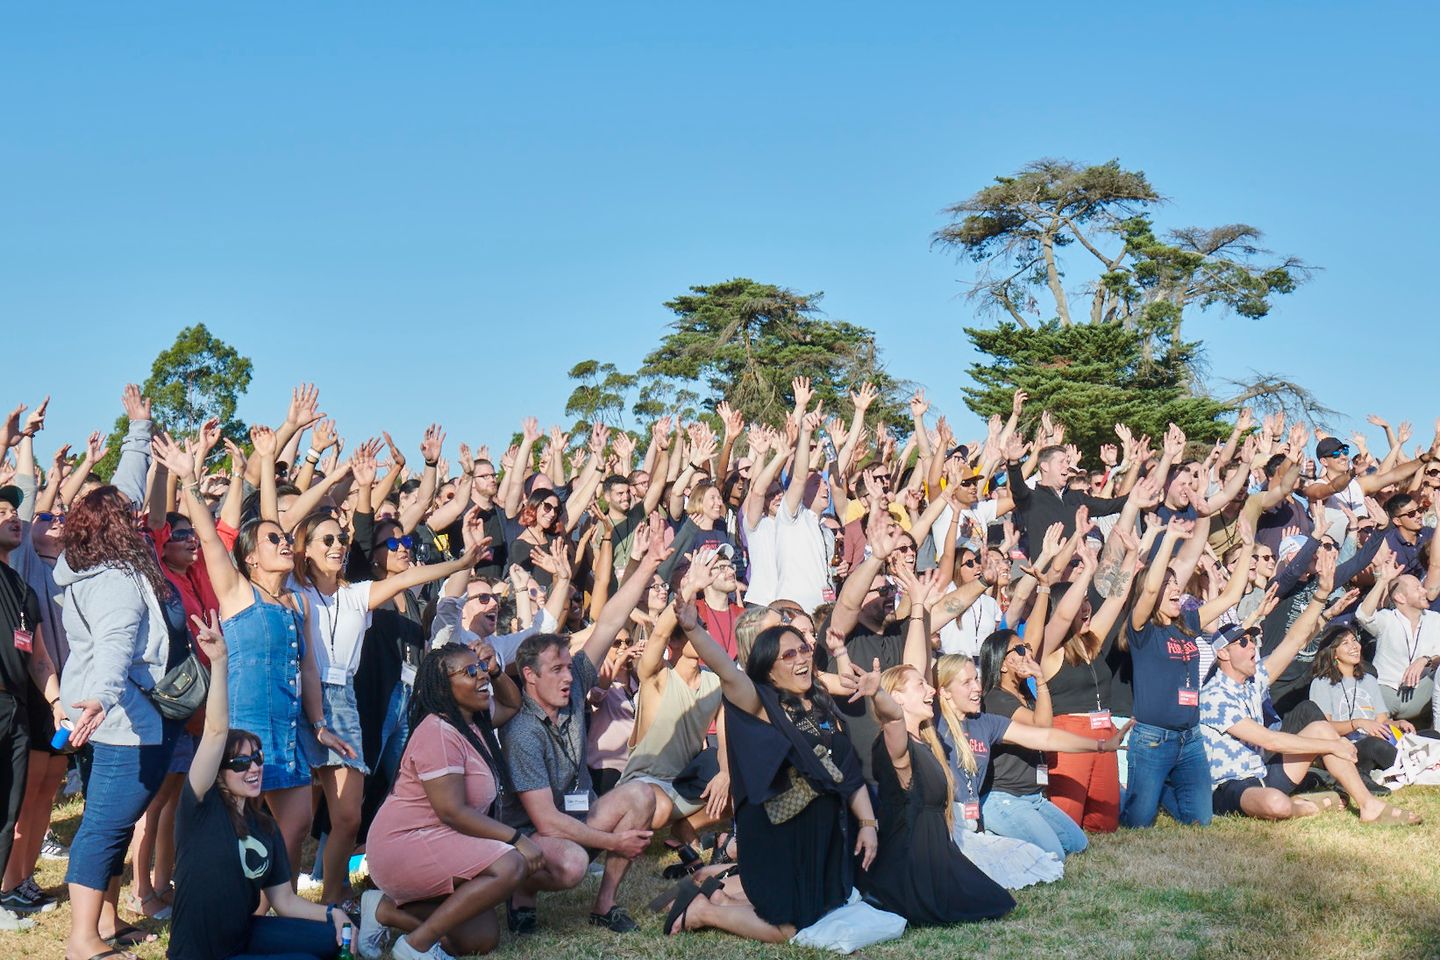 Photograph of Campers at Culture Amp's 2019 Culture Camp